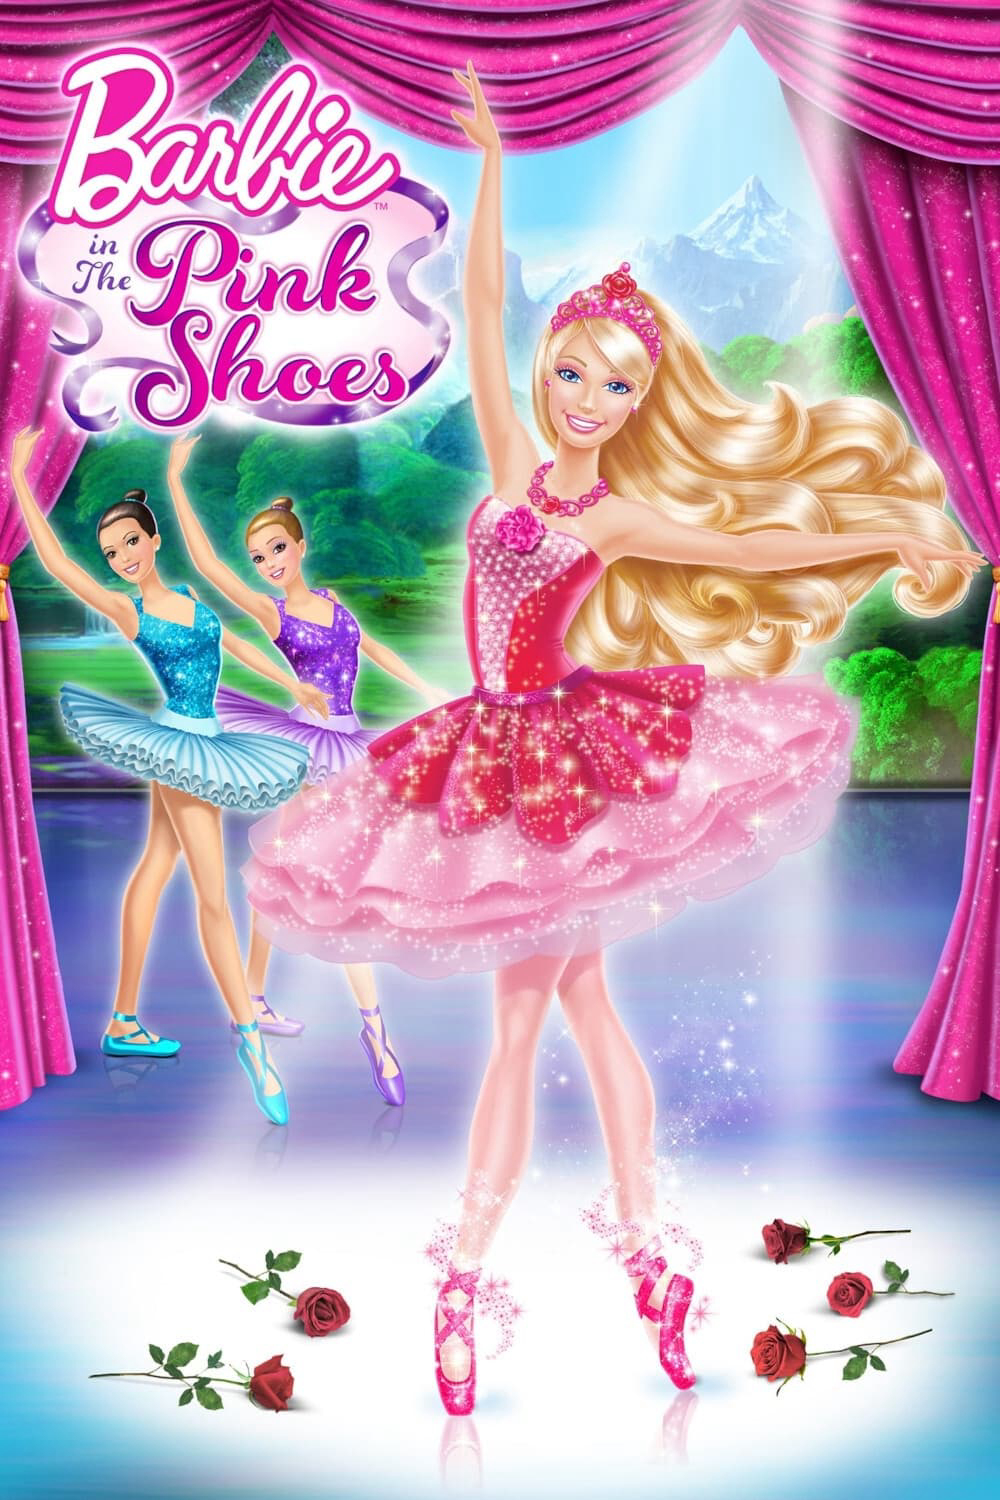 Poster Phim Barbie in the Pink Shoes (Barbie in the Pink Shoes)